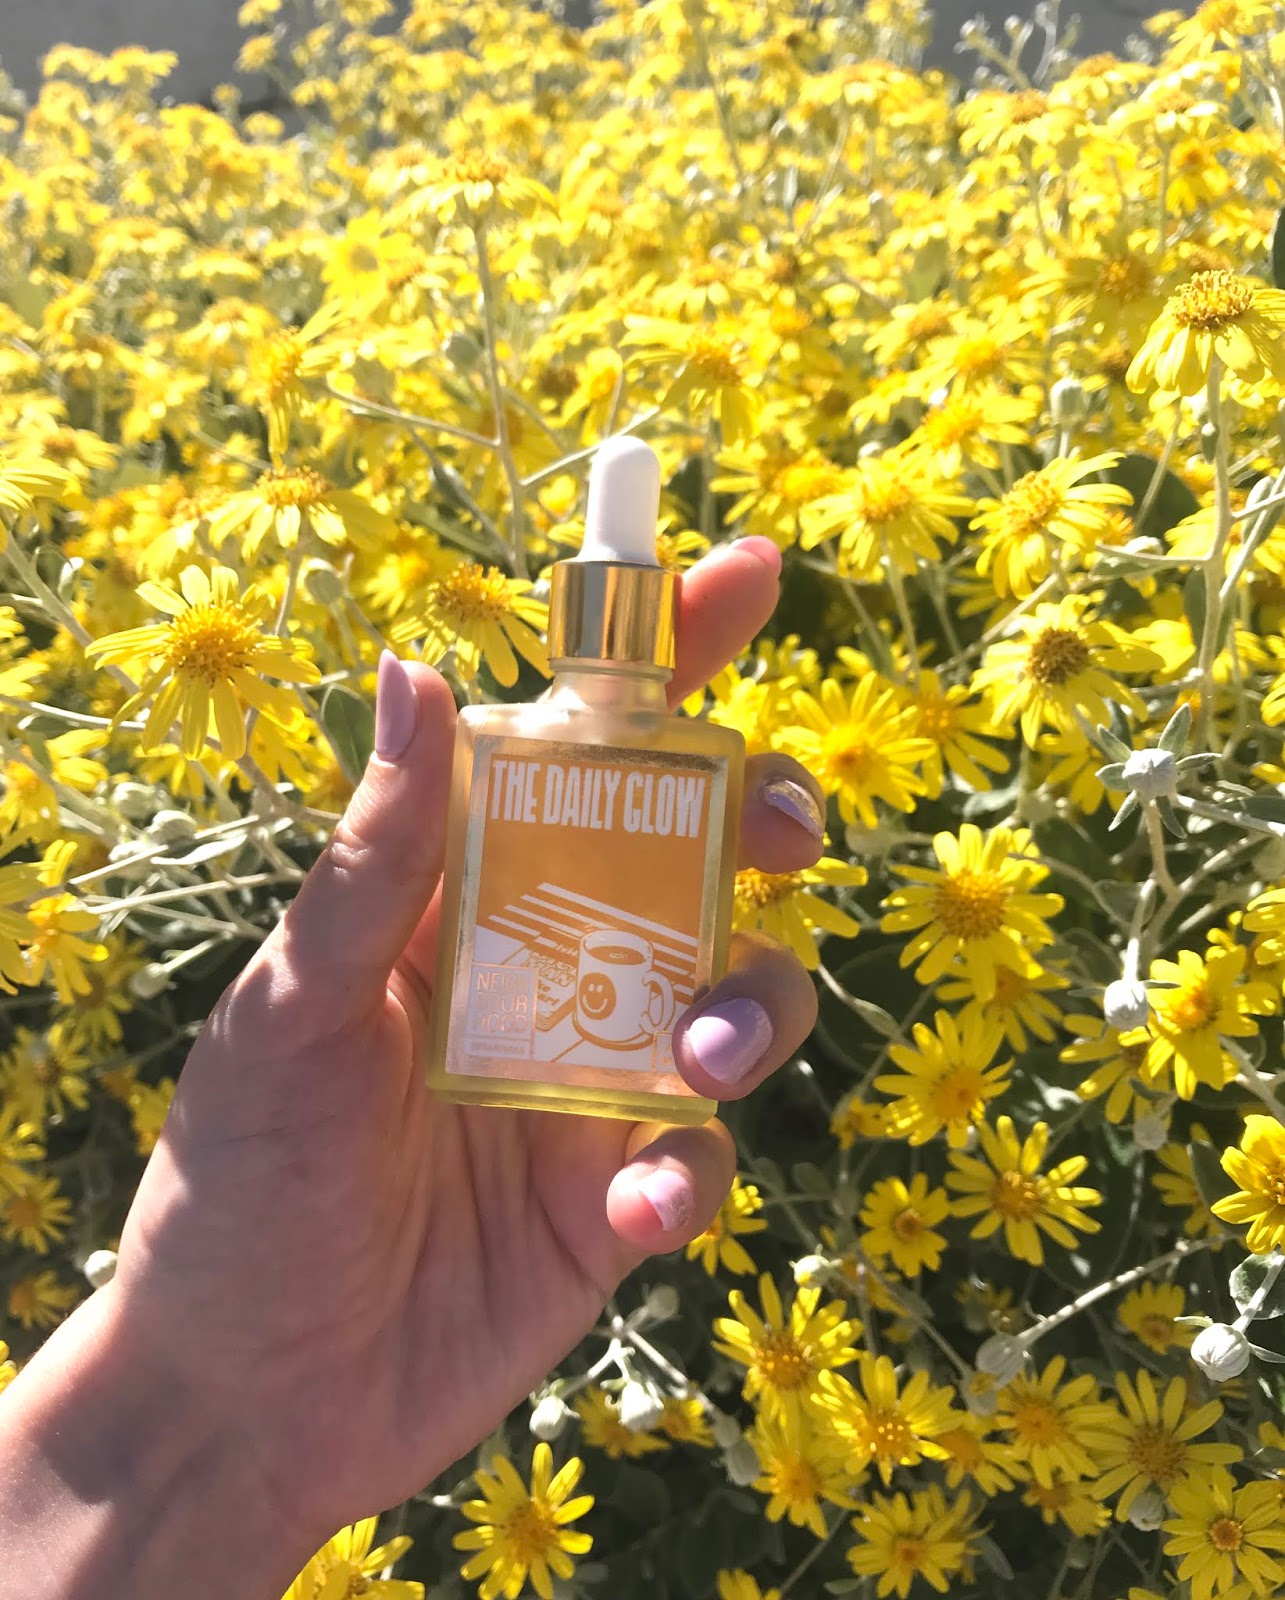 glow in a bottle: the daily glow by neighbourhood botanicals